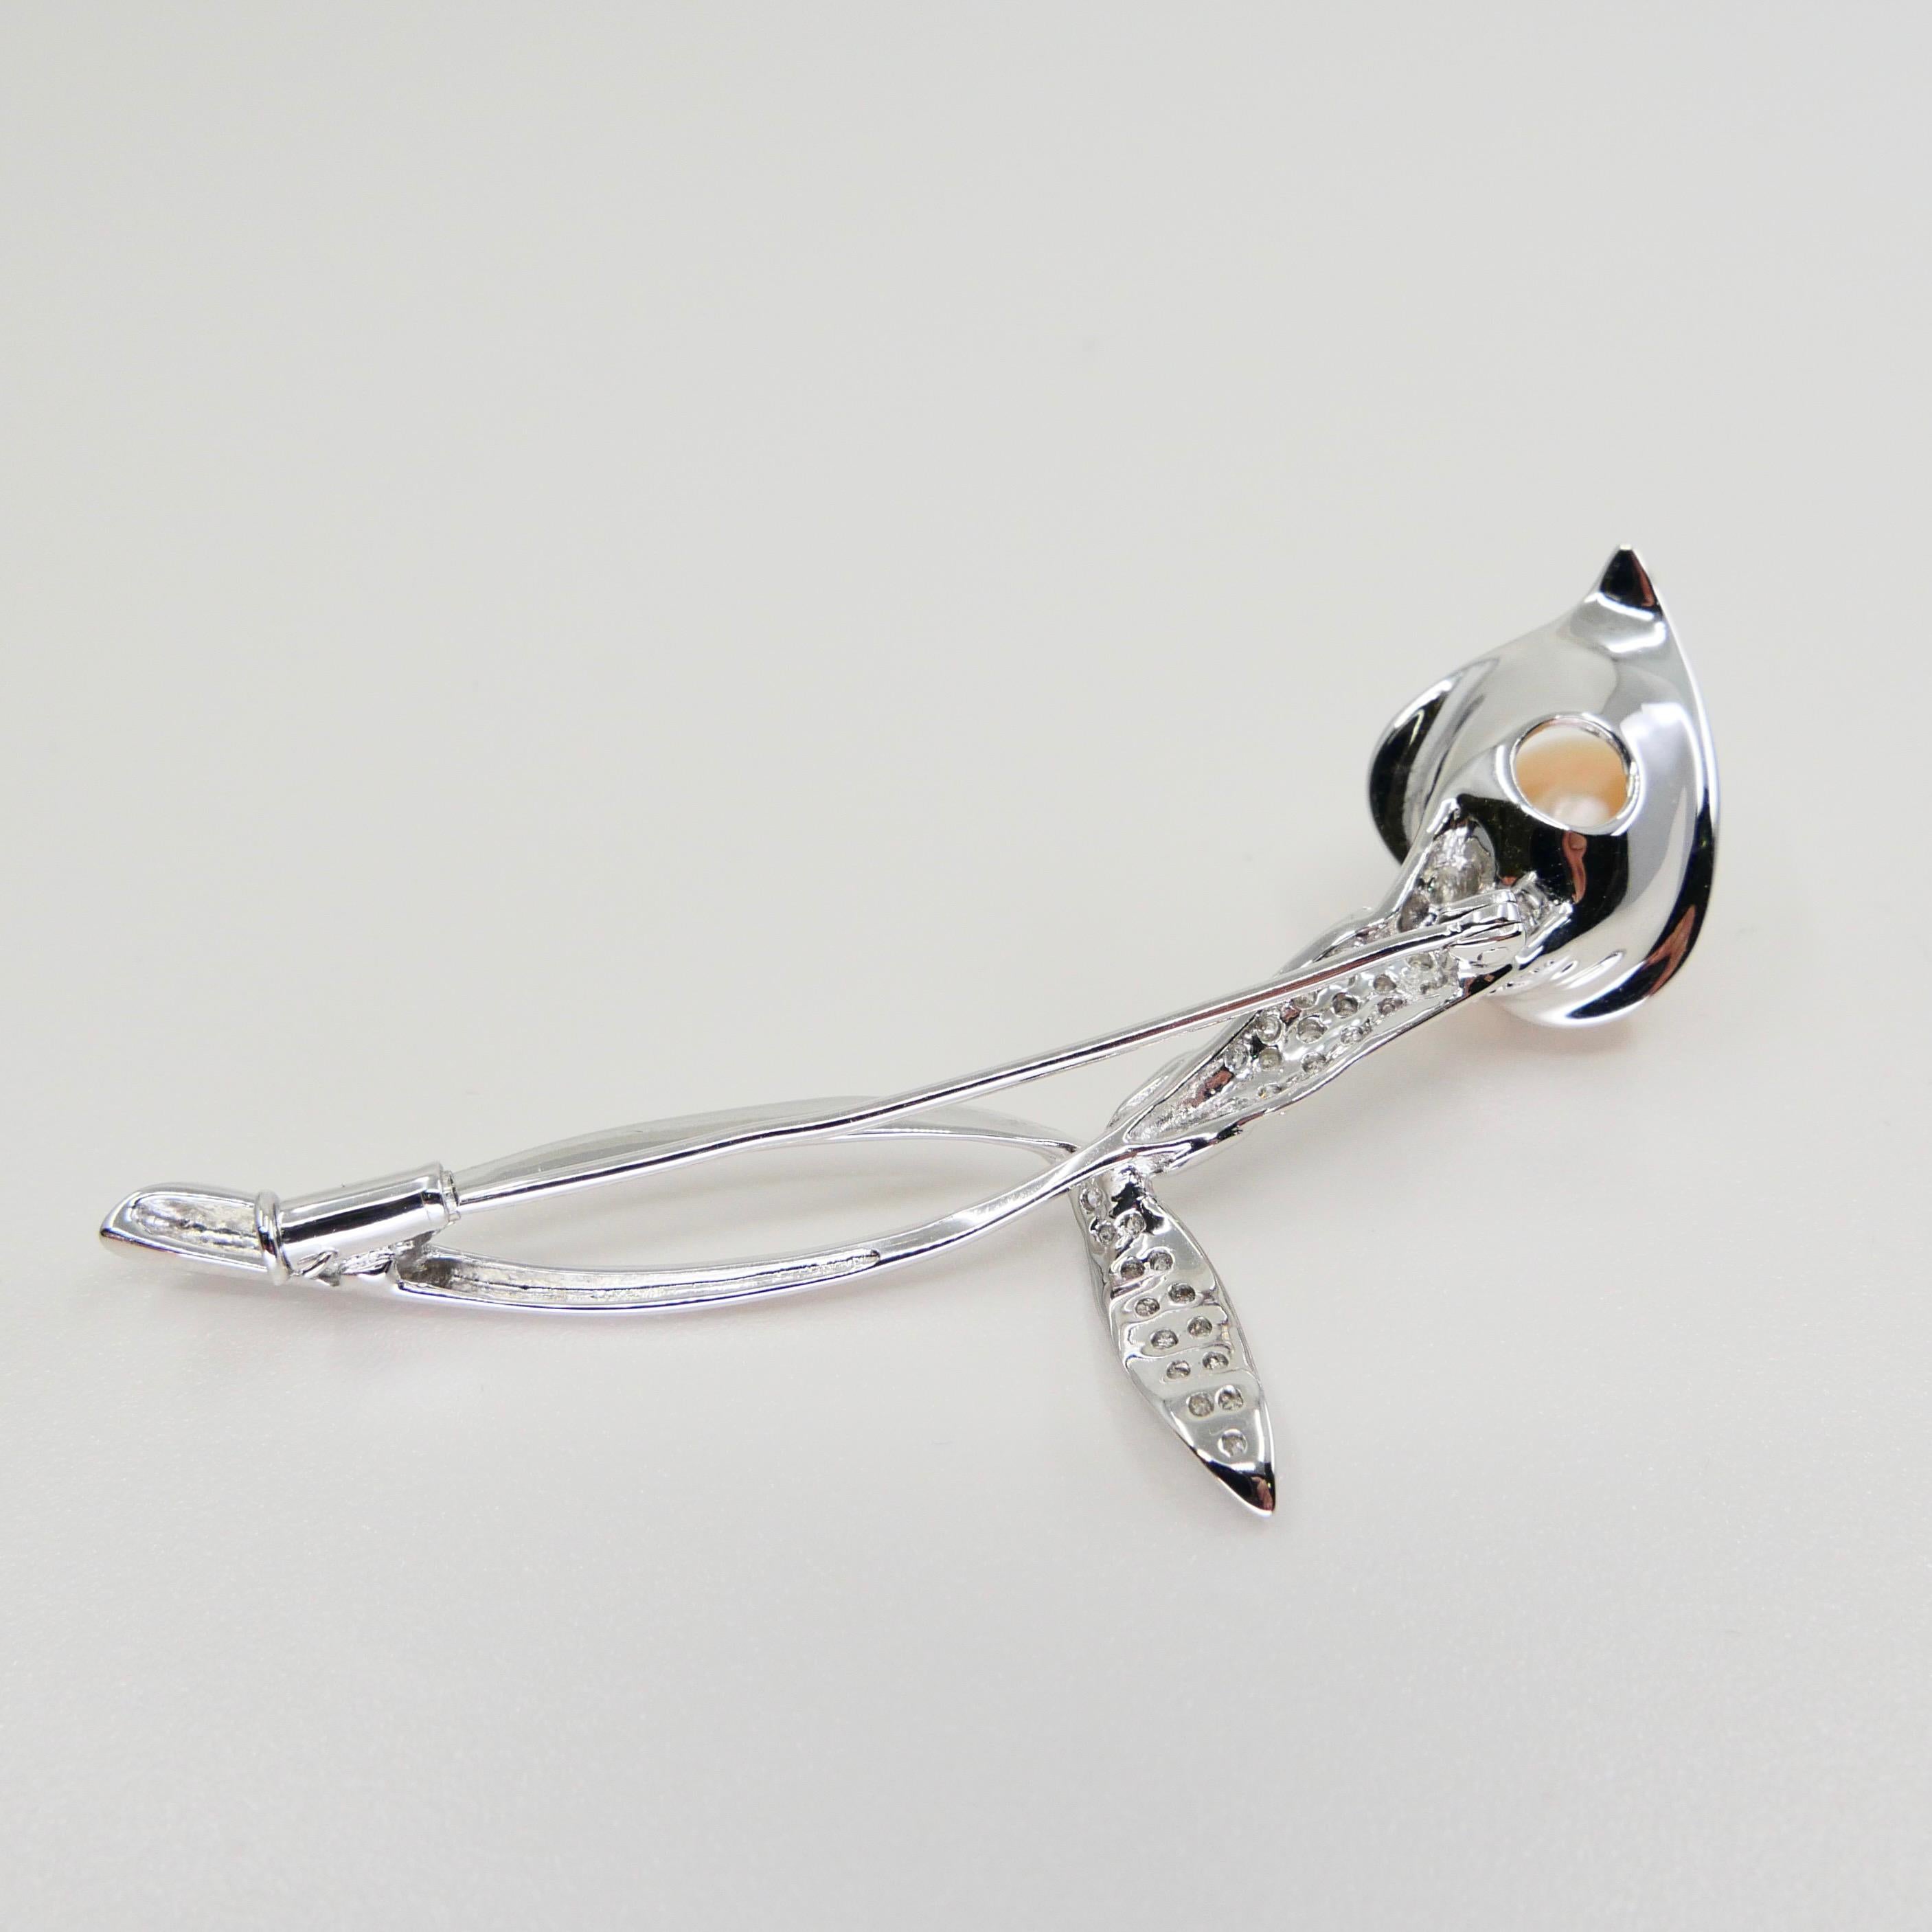 Peachy Rose Color Pearl & Diamond Flower Brooch, 18k White Gold For Sale 1